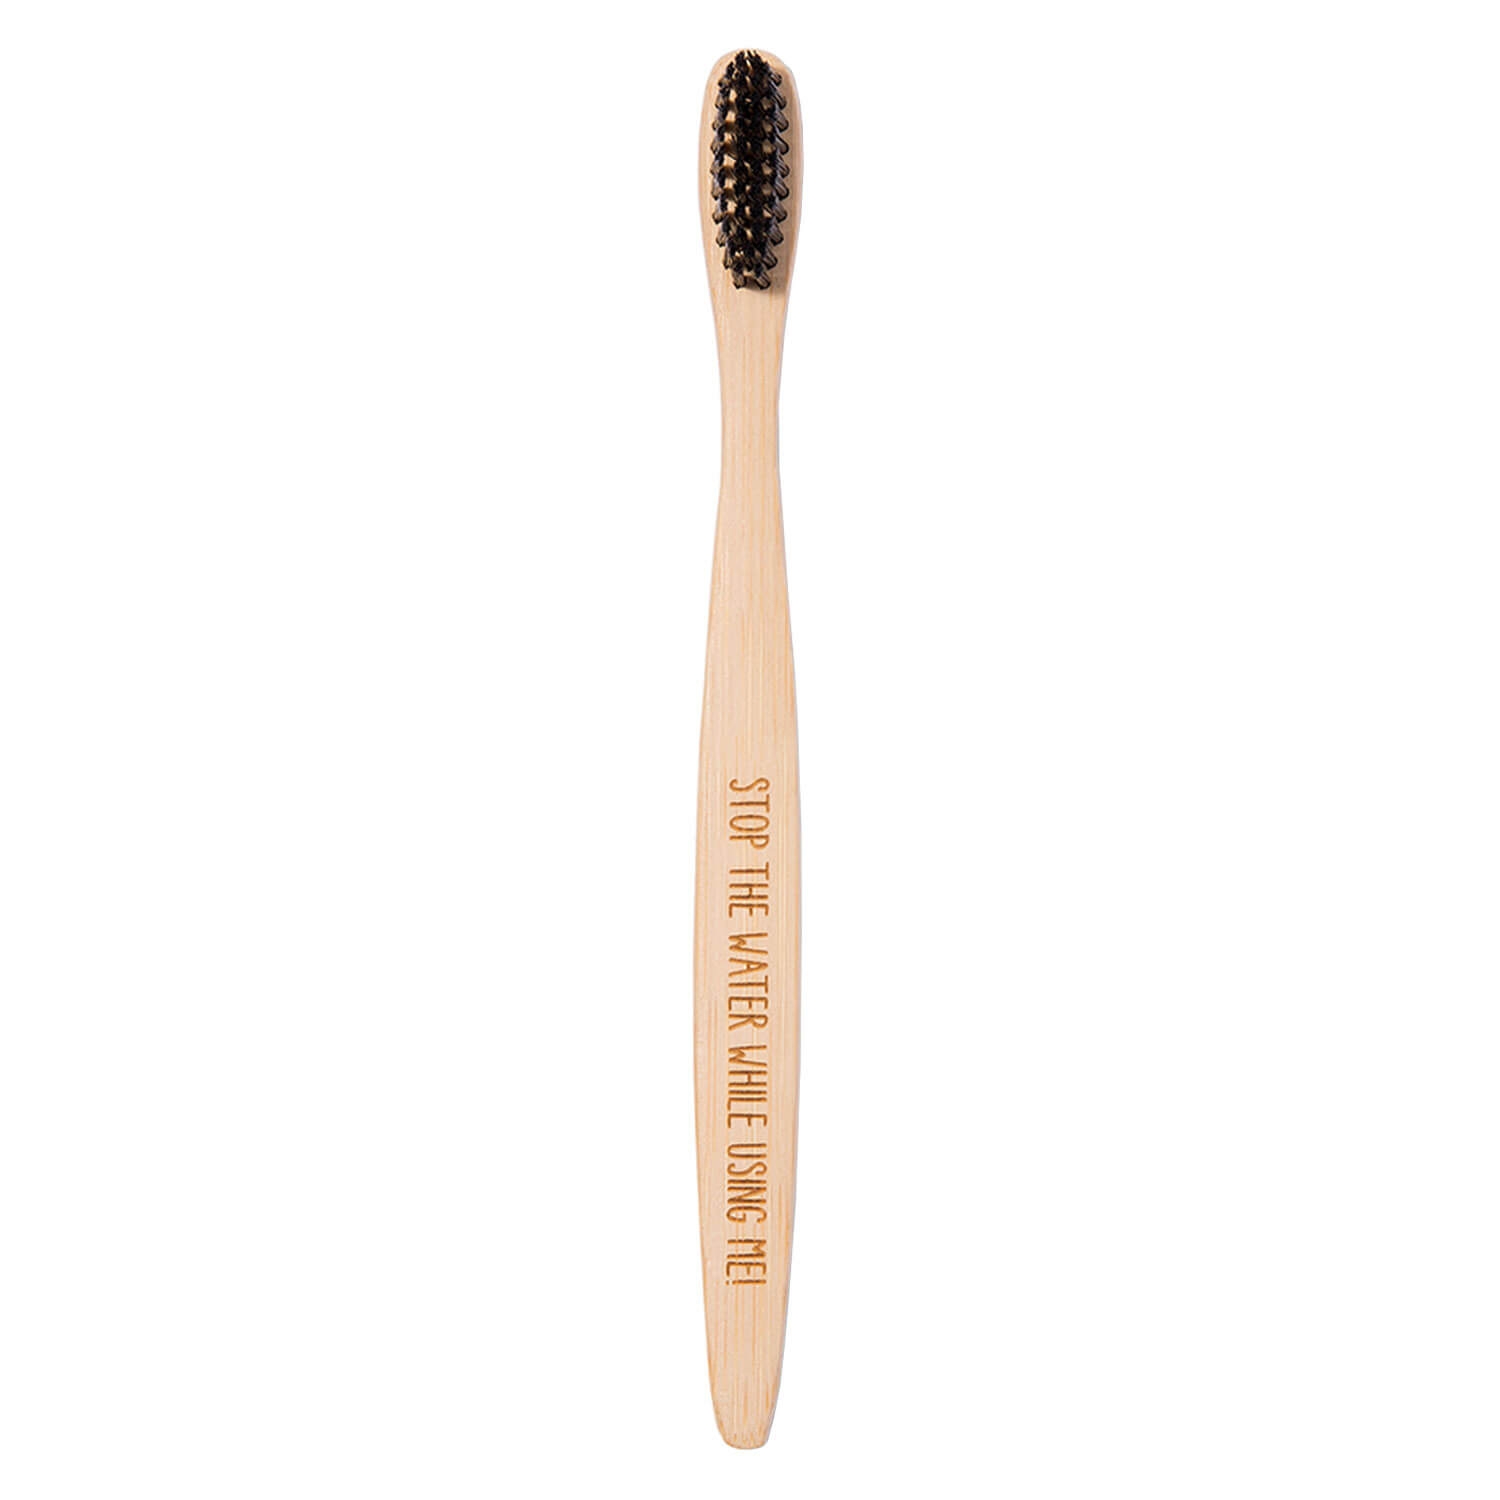 Product image from All Natural Smile - Wooden Bamboo Tooth Brush